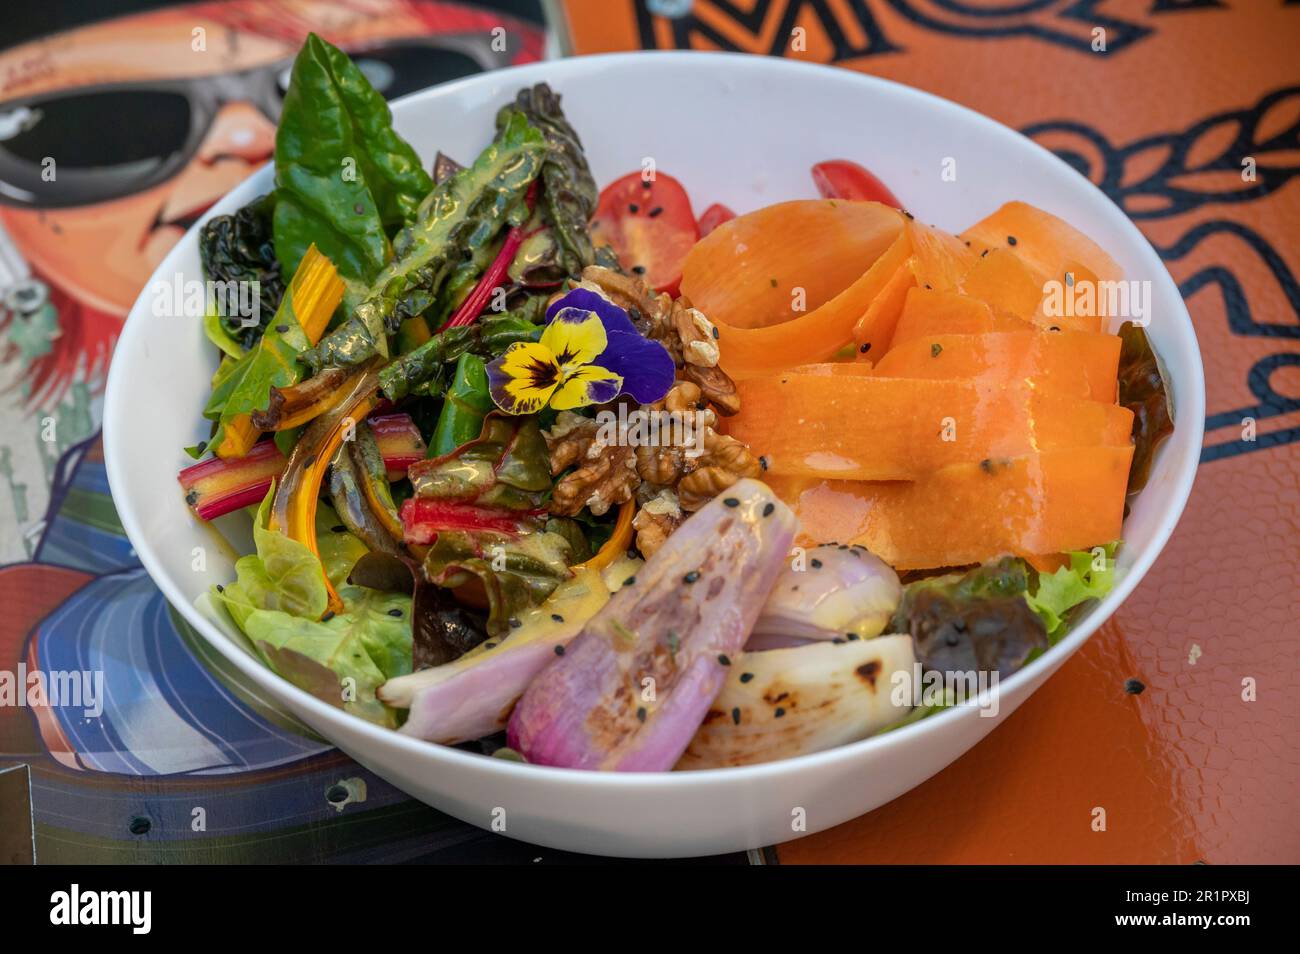 Italy, Trentino-Alto Adige, Alto Adige - South Tyrol, Merano, vegan cuisine with animal product free ingredients, L'Insalatina Saladbar by Markus Stocker and Viktoria Forcher, colorful salad plate with steamed chard and fruity dressing. Stock Photo